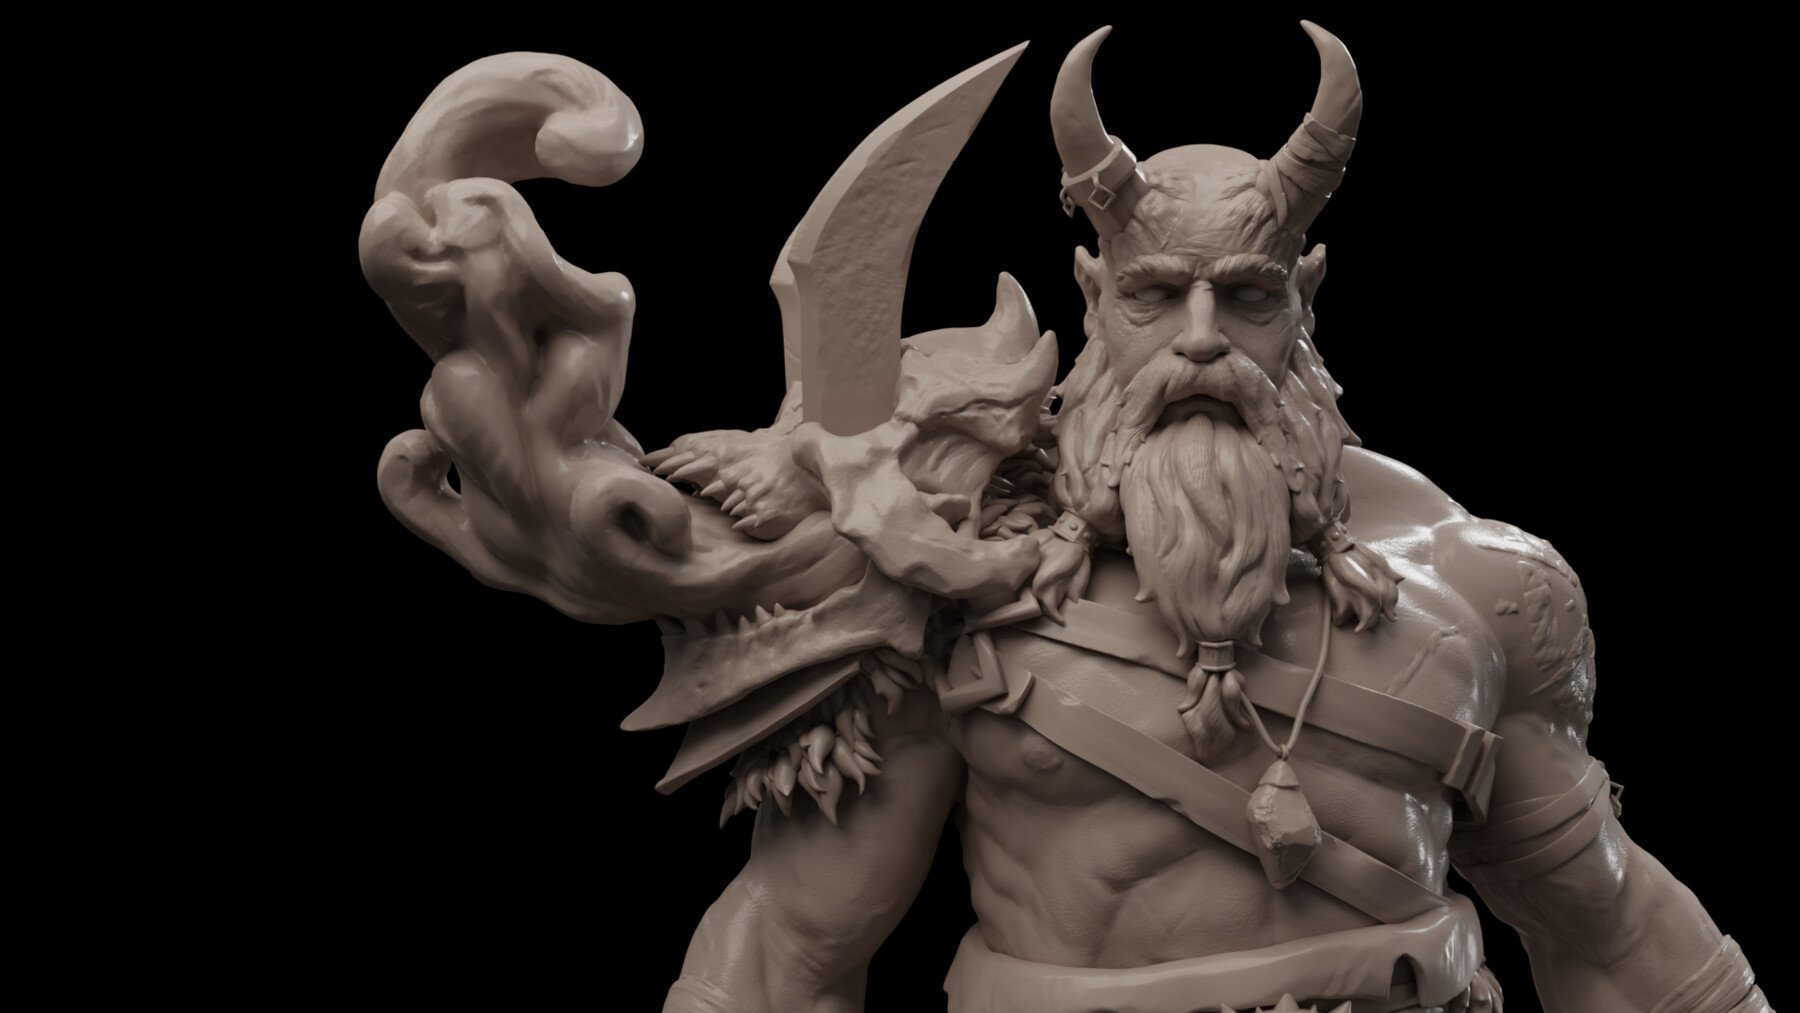 udemy - advance zbrush character creation with abraham leal